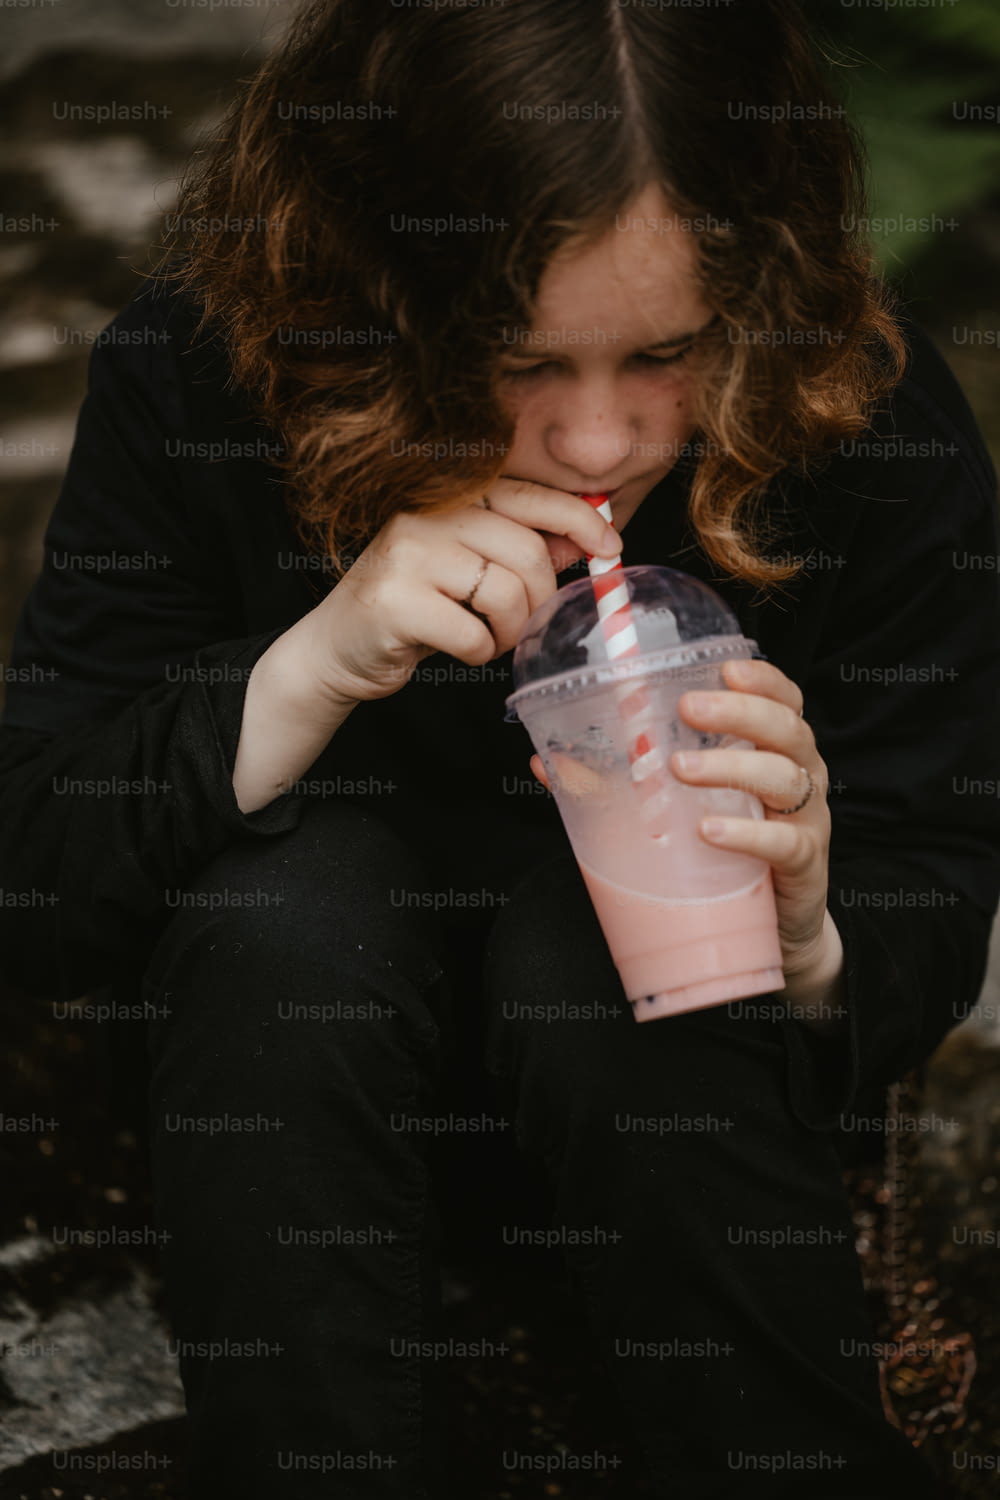 a woman sitting on the ground drinking from a pink cup